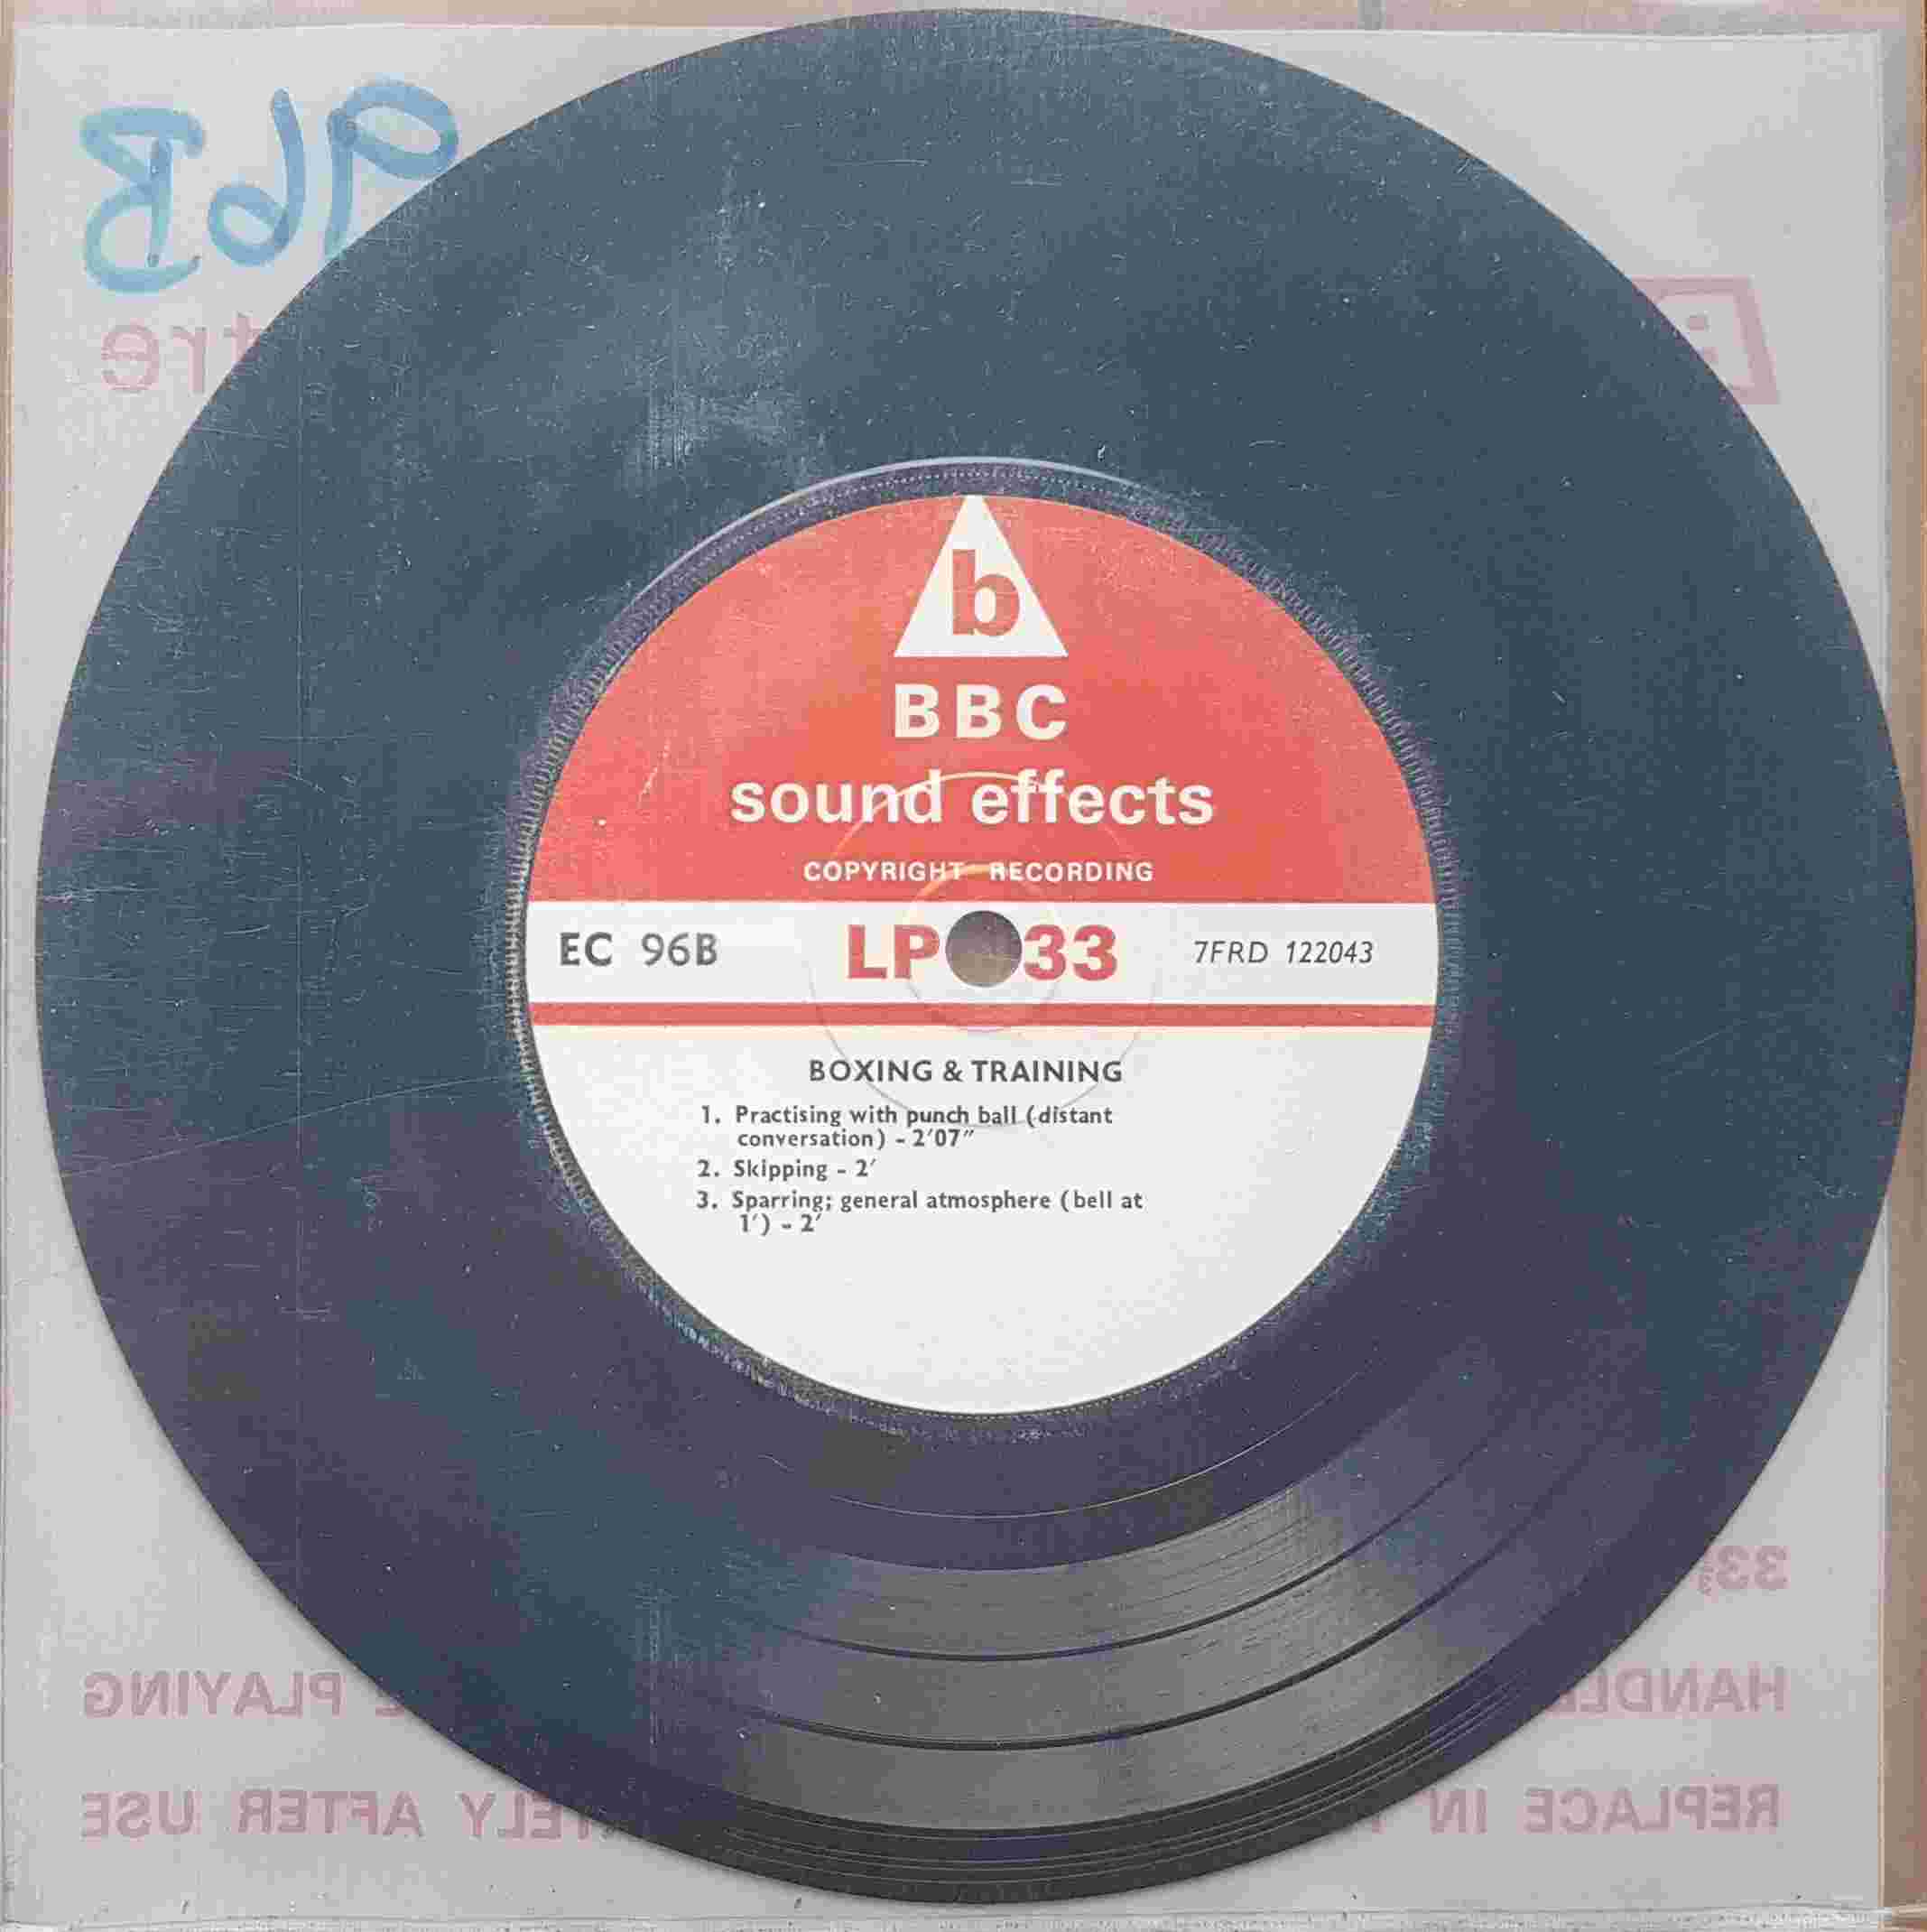 Picture of EC 96B Boxing by artist Not registered from the BBC records and Tapes library